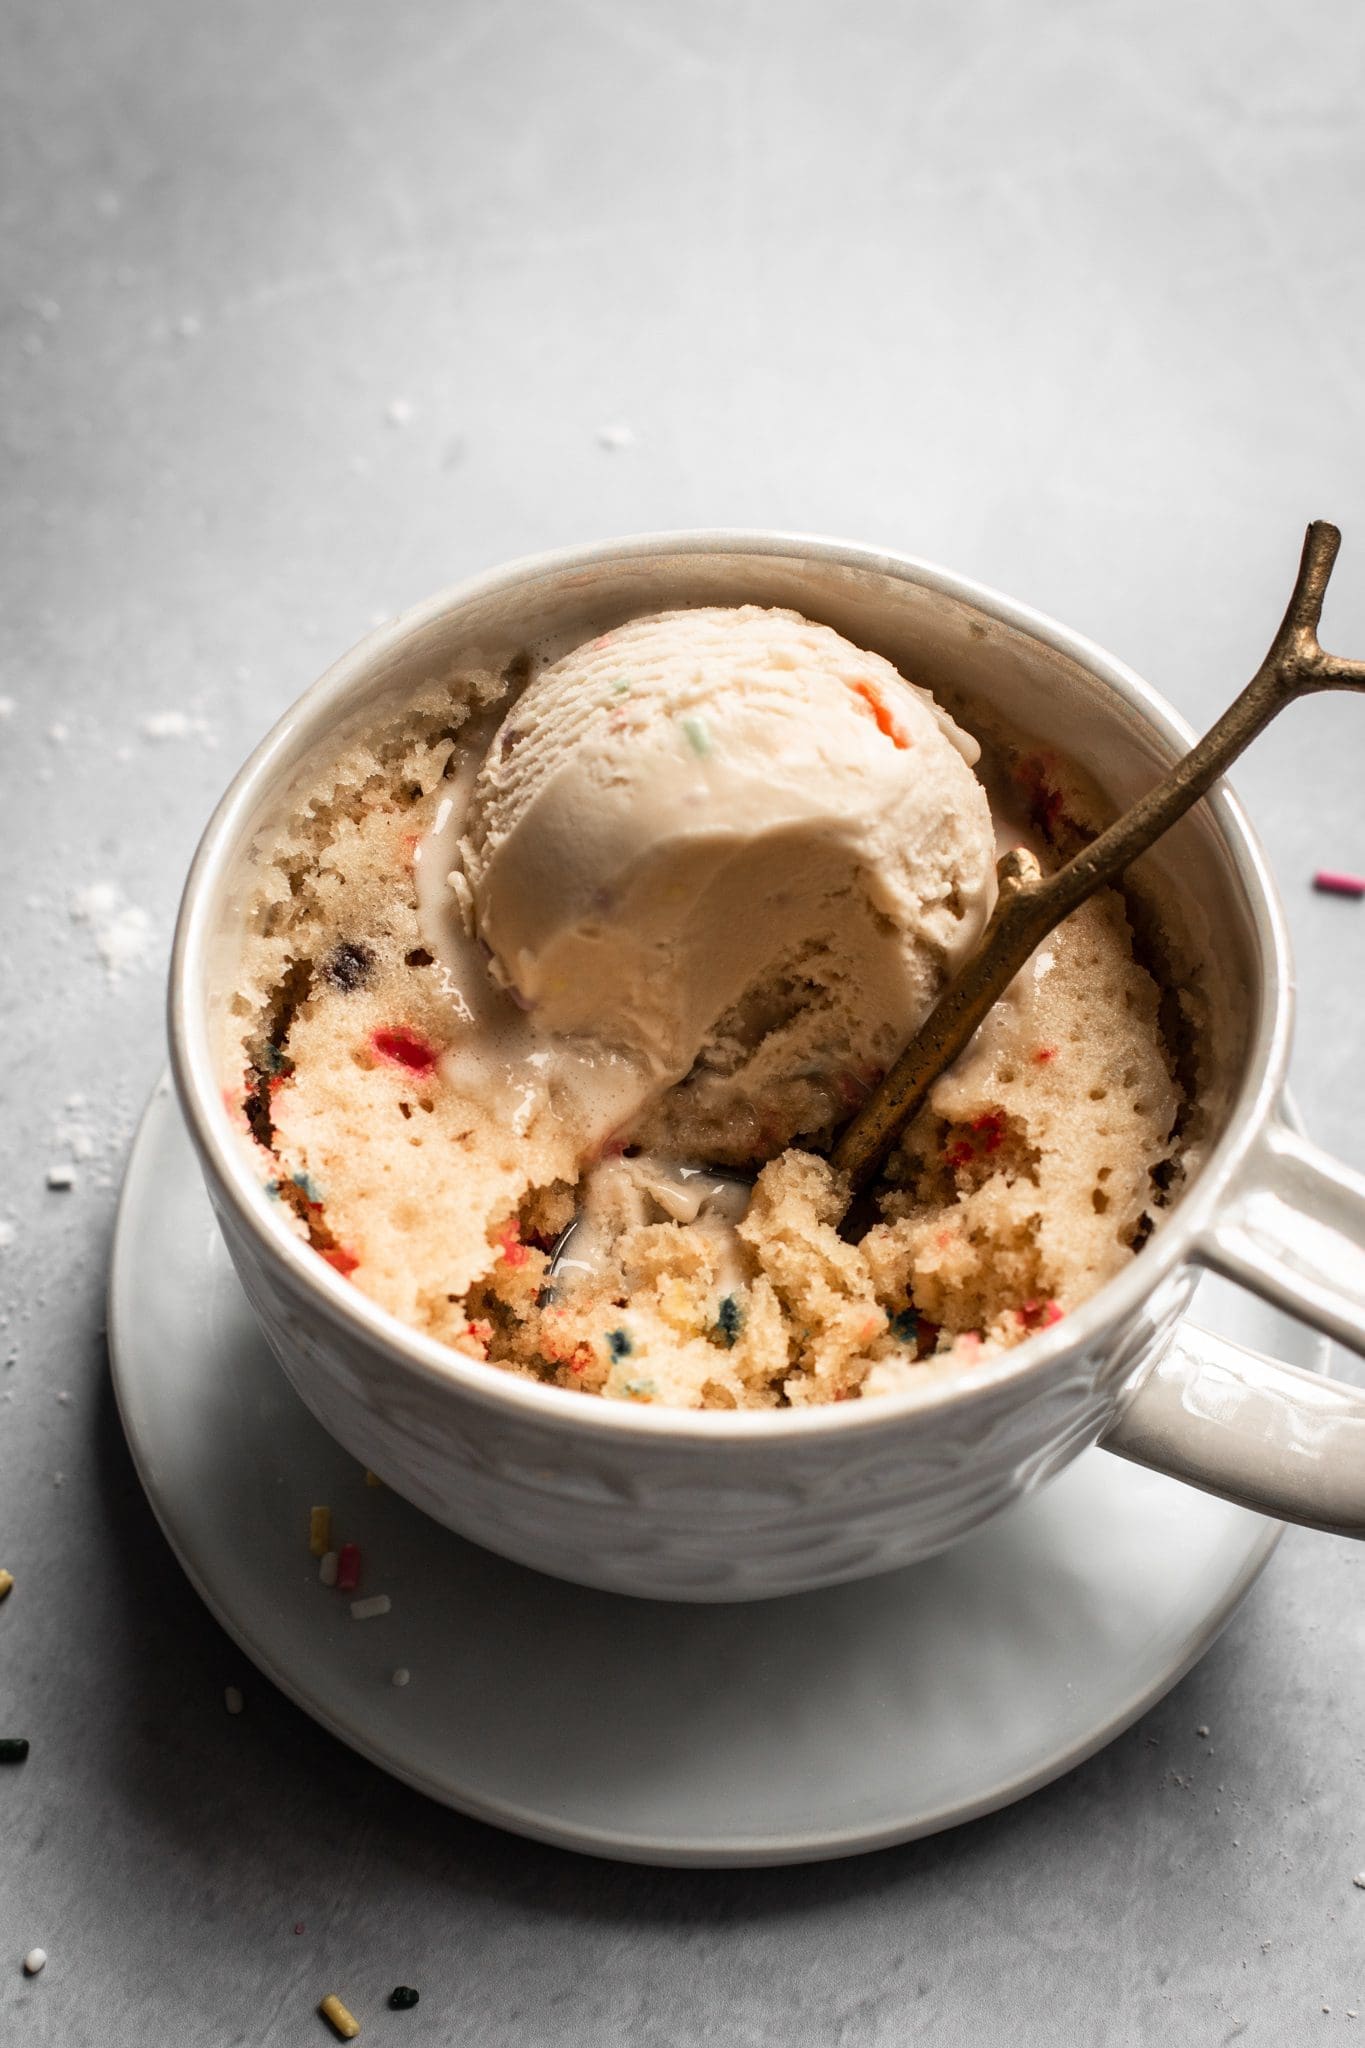 spoon in a mug cake with ice cream